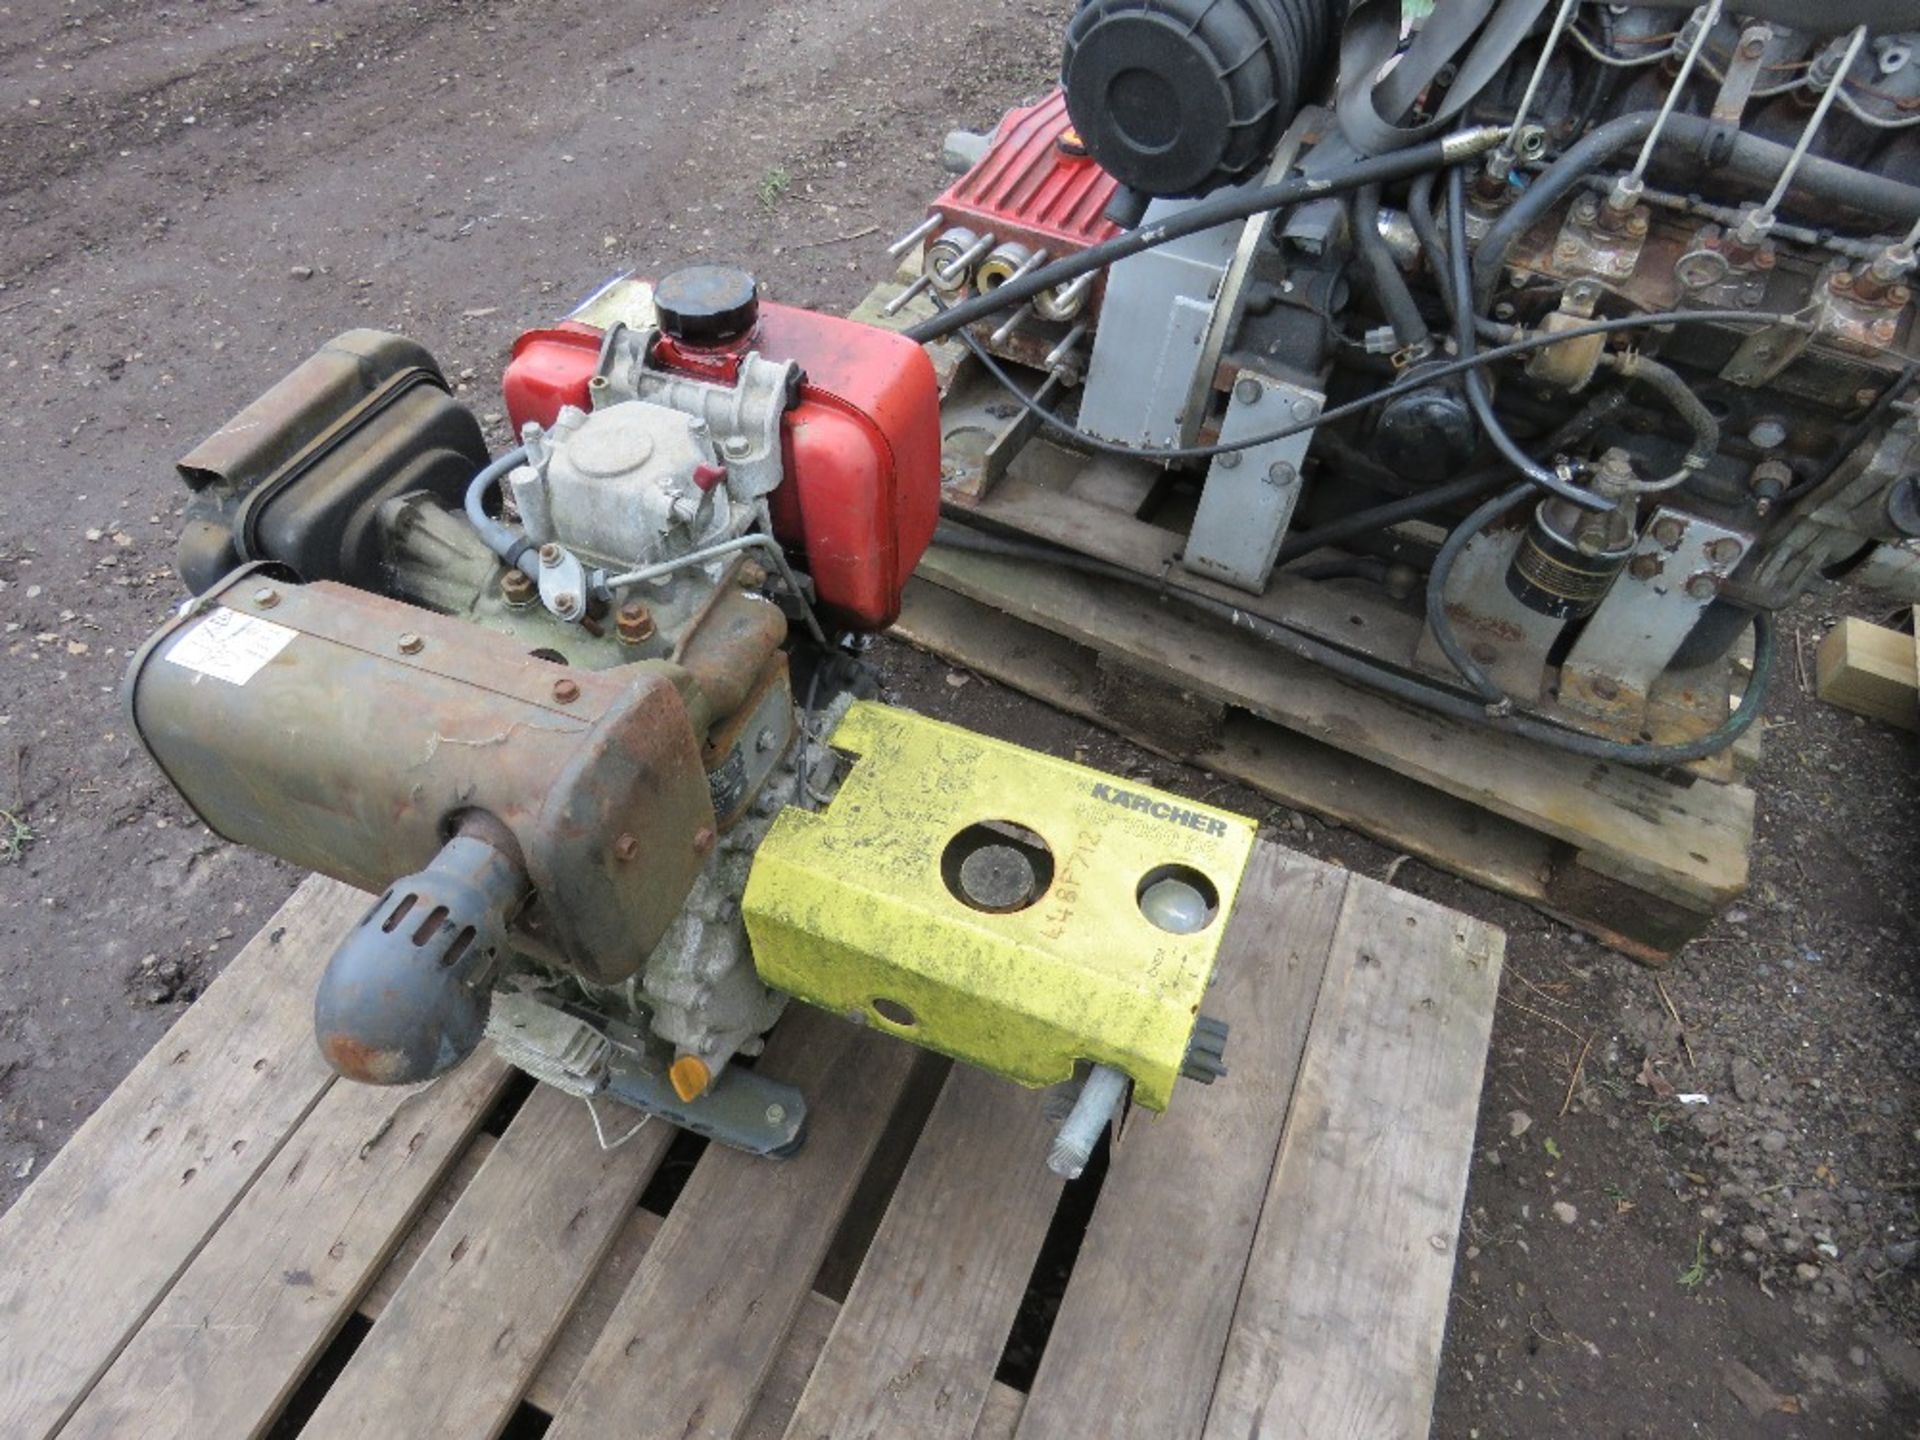 YANMAR SINGLE CYLINDER DIESEL ENGINE WITH KARCHER WASHER PUMP HEAD ATTACHED. - Image 2 of 2